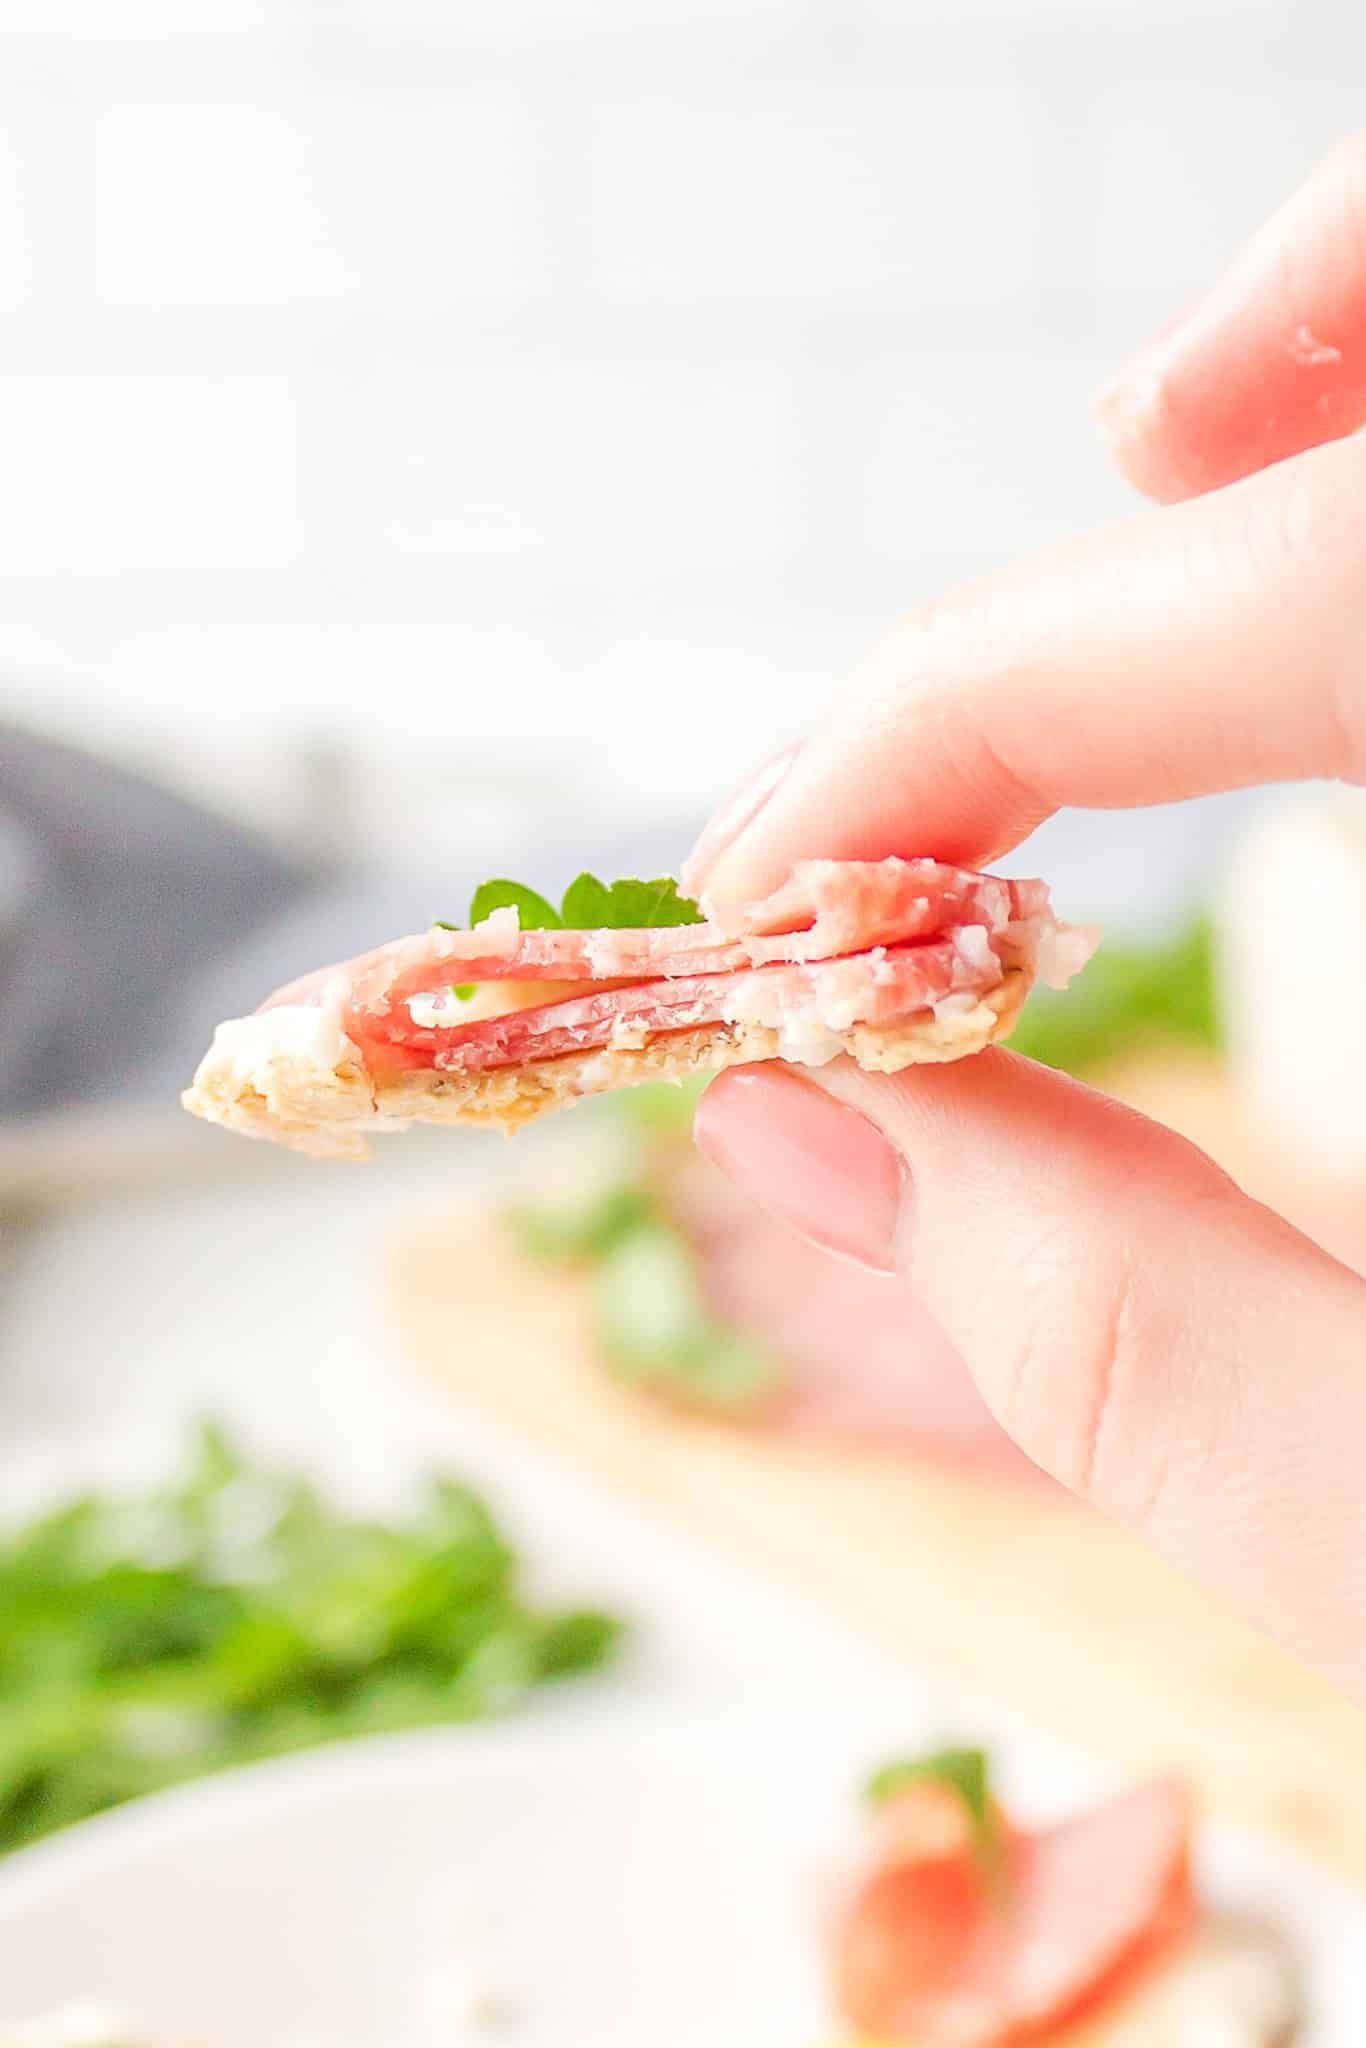 A gluten-free cracker with dairy-free cheese and salami held between two fingers.